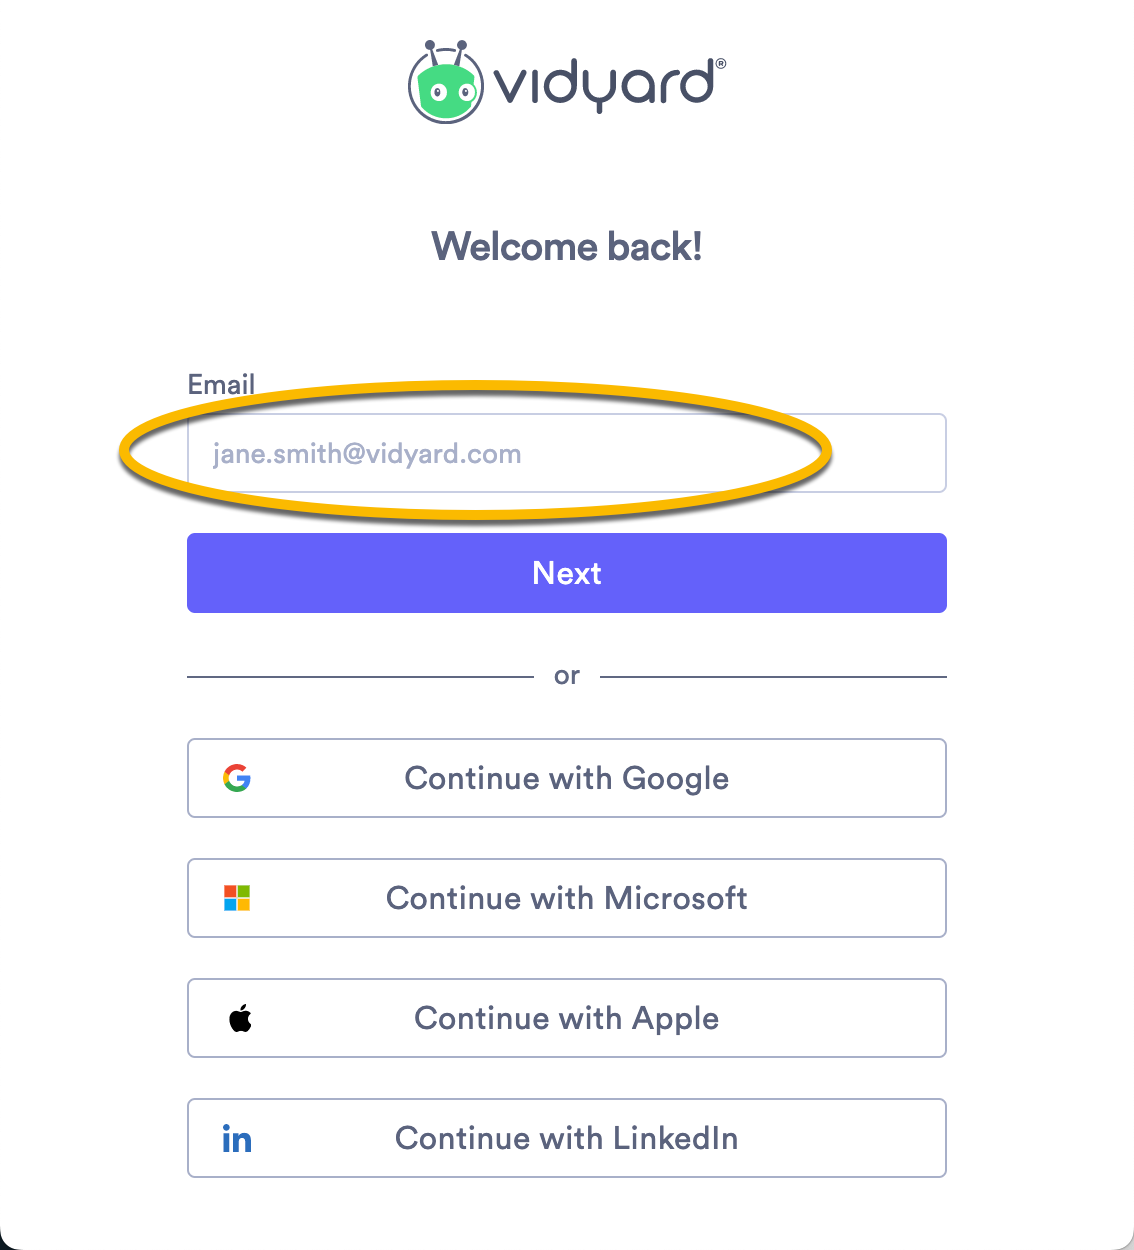 Vidyard's sign-in page with option to enter your email or use a third-party account like Google, Apple, LinkedIn or Microsoft